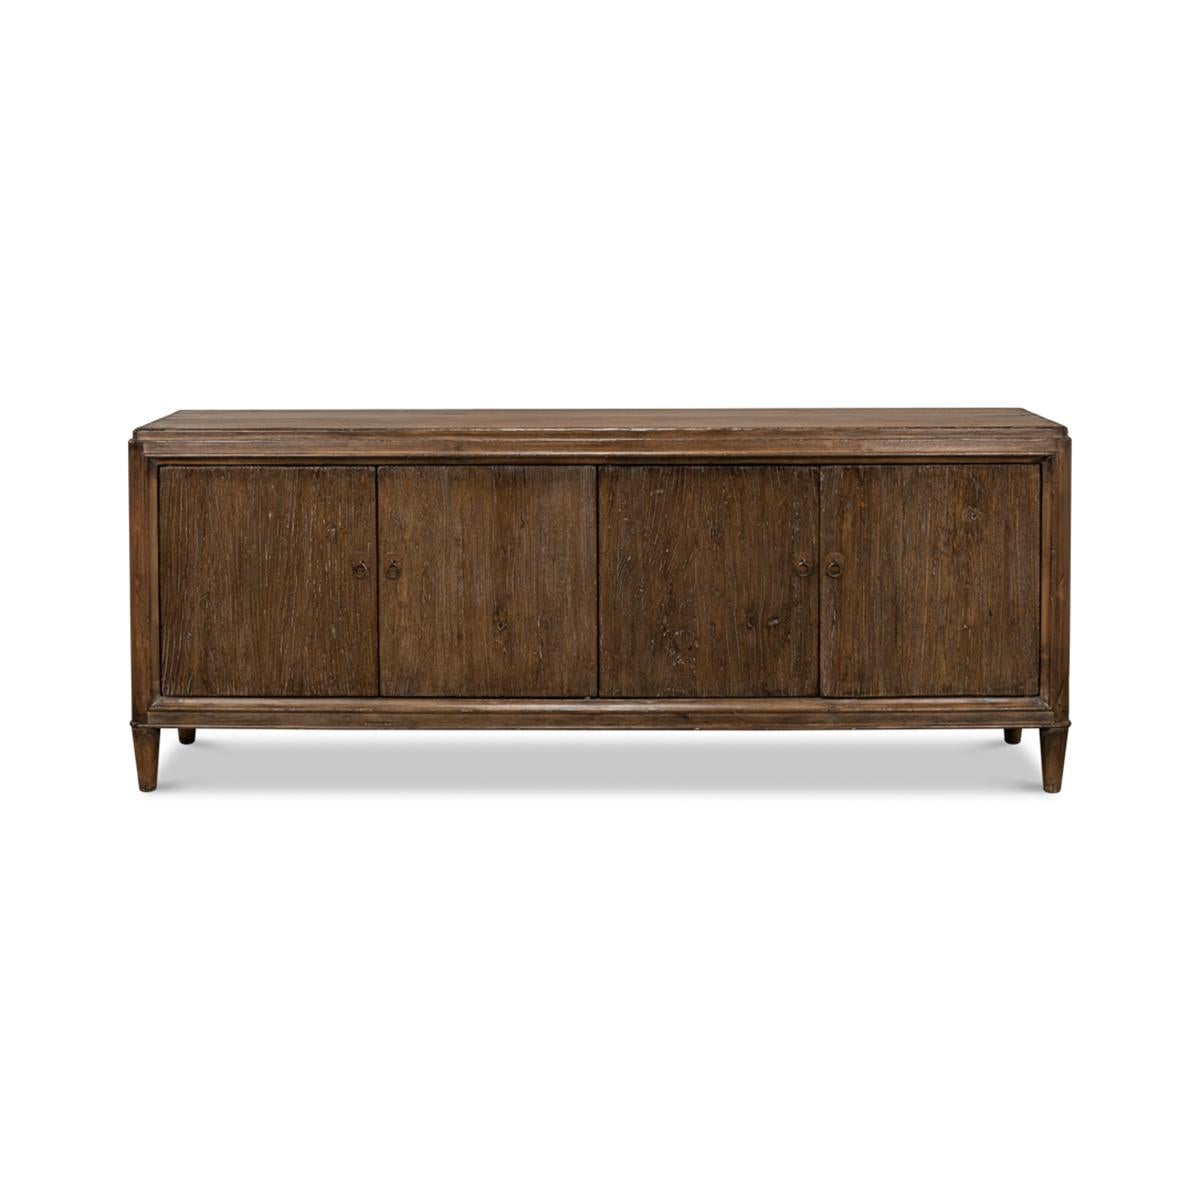 French Art Deco sideboard, made of Elm, the sideboard has four doors opening to two separate compartments. With an antiqued rustic finish and raised on round tapered legs. The interior with two removable shelves.

Dimensions: 87